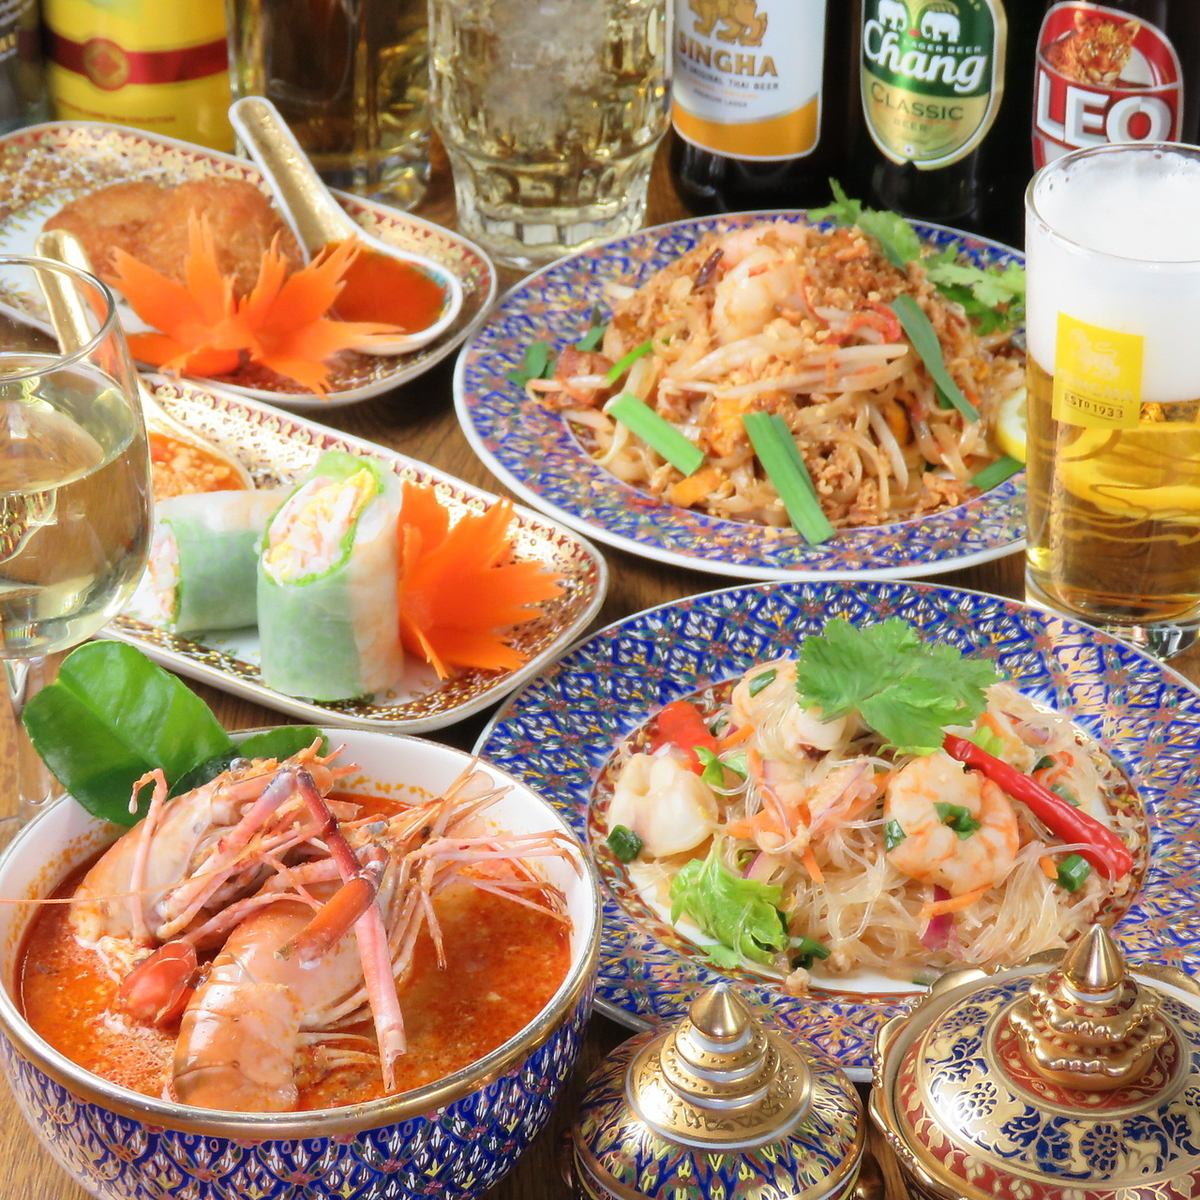 Spicy, healthy, and fun is the motto! A cozy shop where you can enjoy authentic Thai food ♪